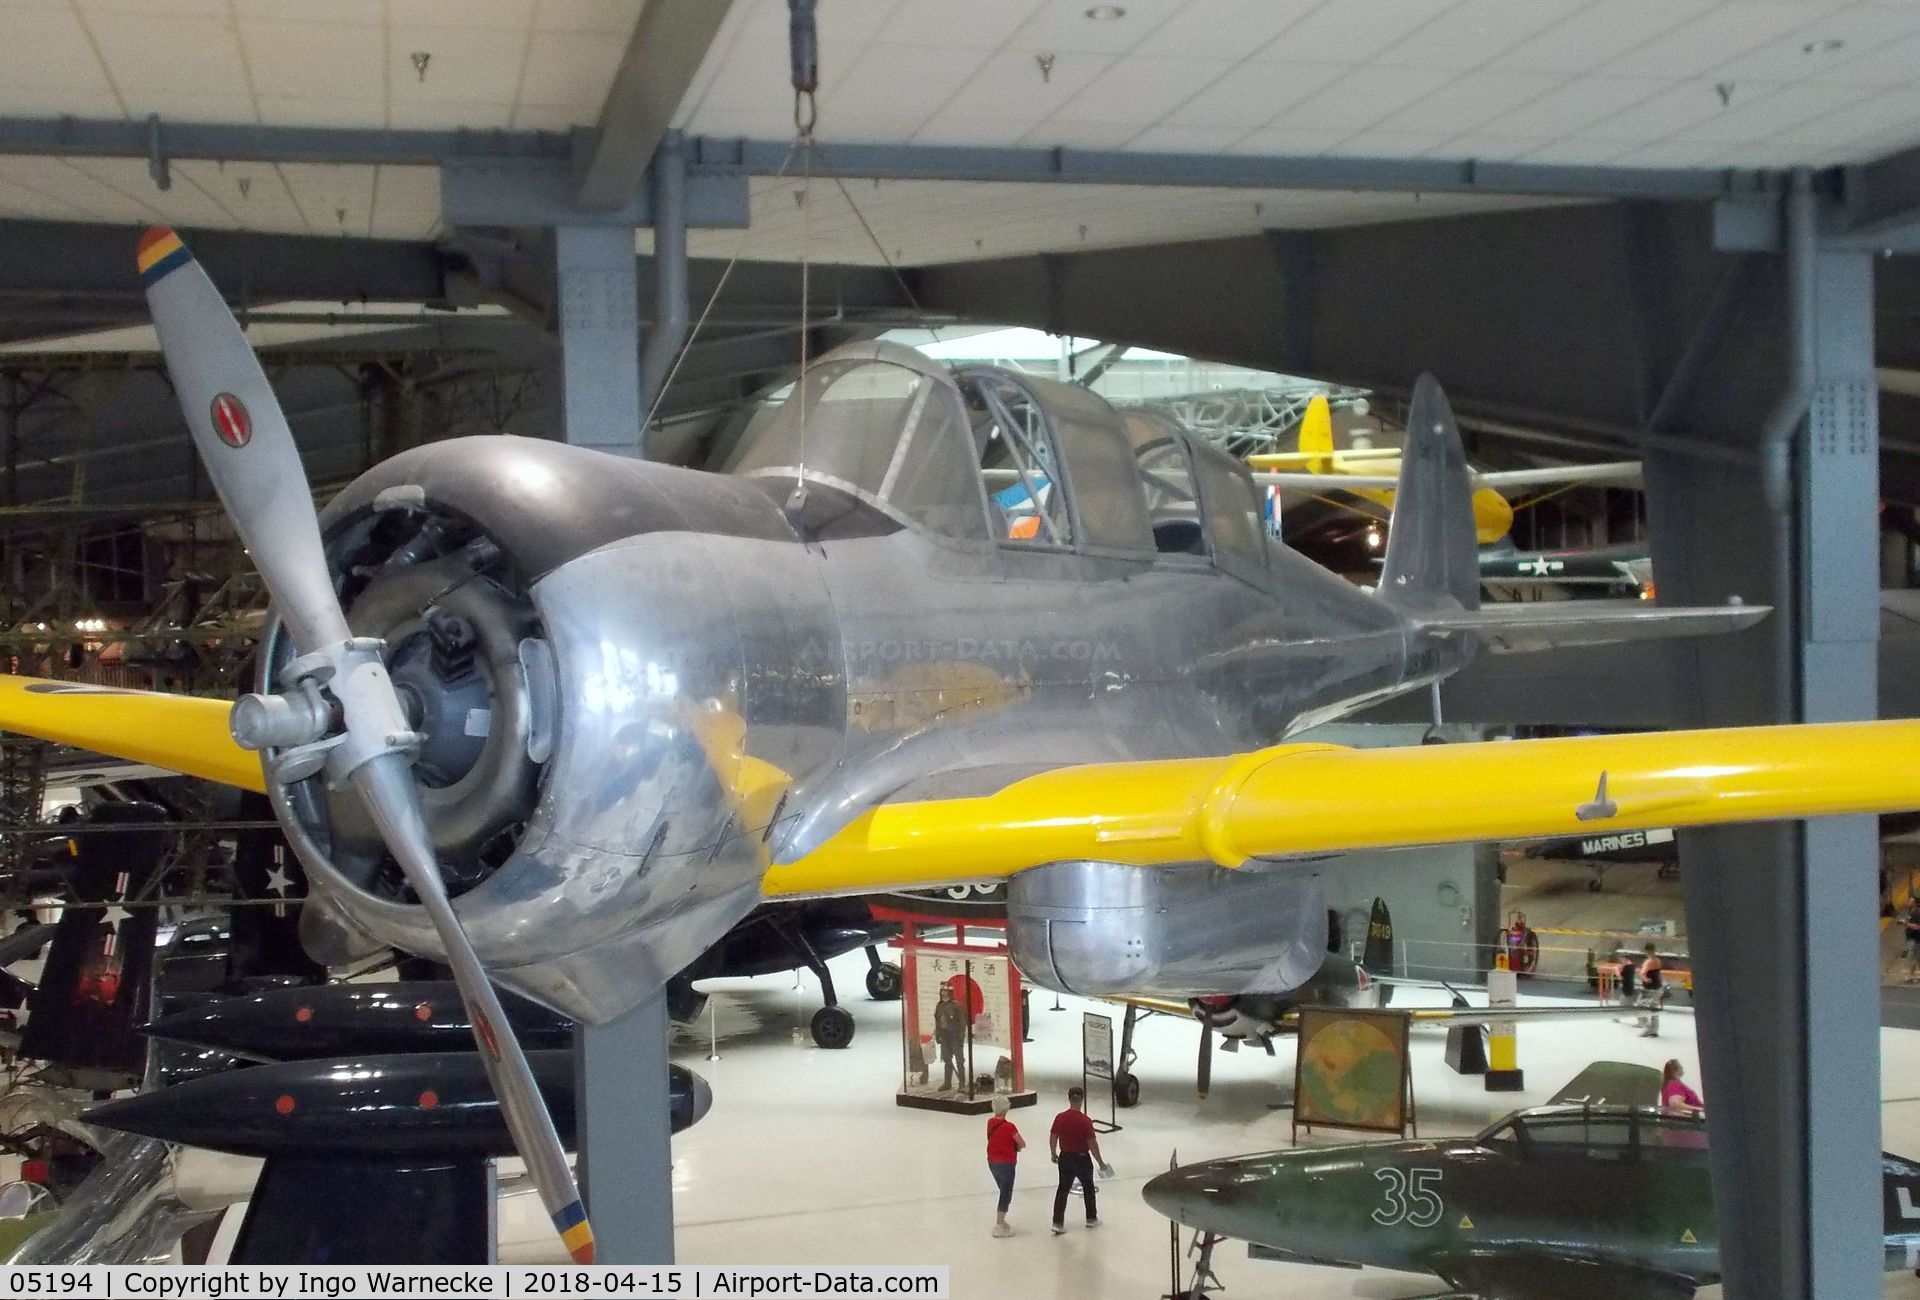 05194, 1941 Curtiss-Wright SNC-1 C/N 4255, Curtiss-Wright SCN-1 Falcon at the NMNA, Pensacola FL